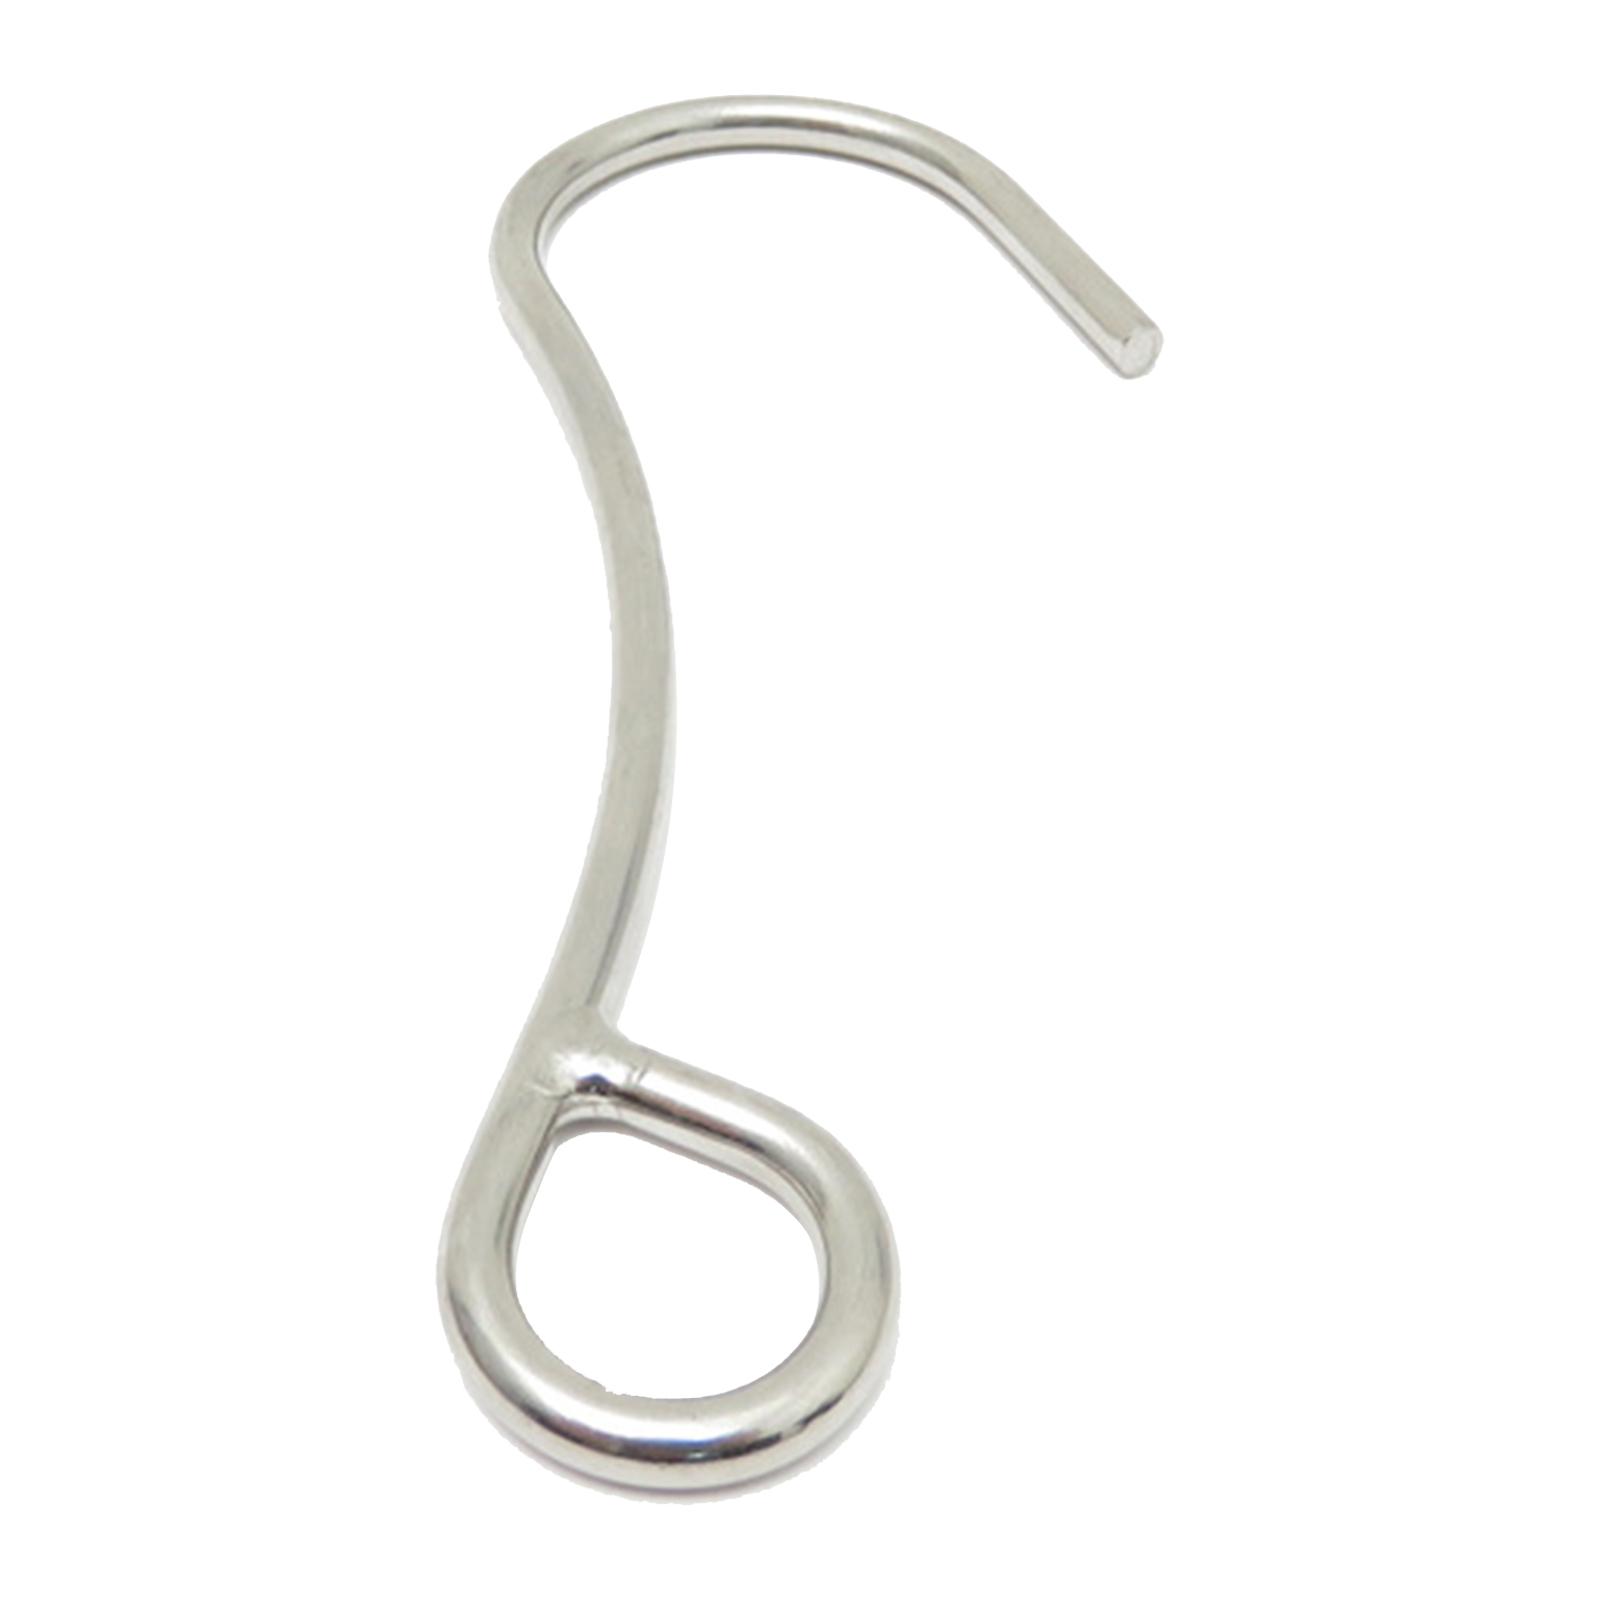 Scuba Diving Reef Hook Durable for Underwater Sports Drift Diving Free Dive